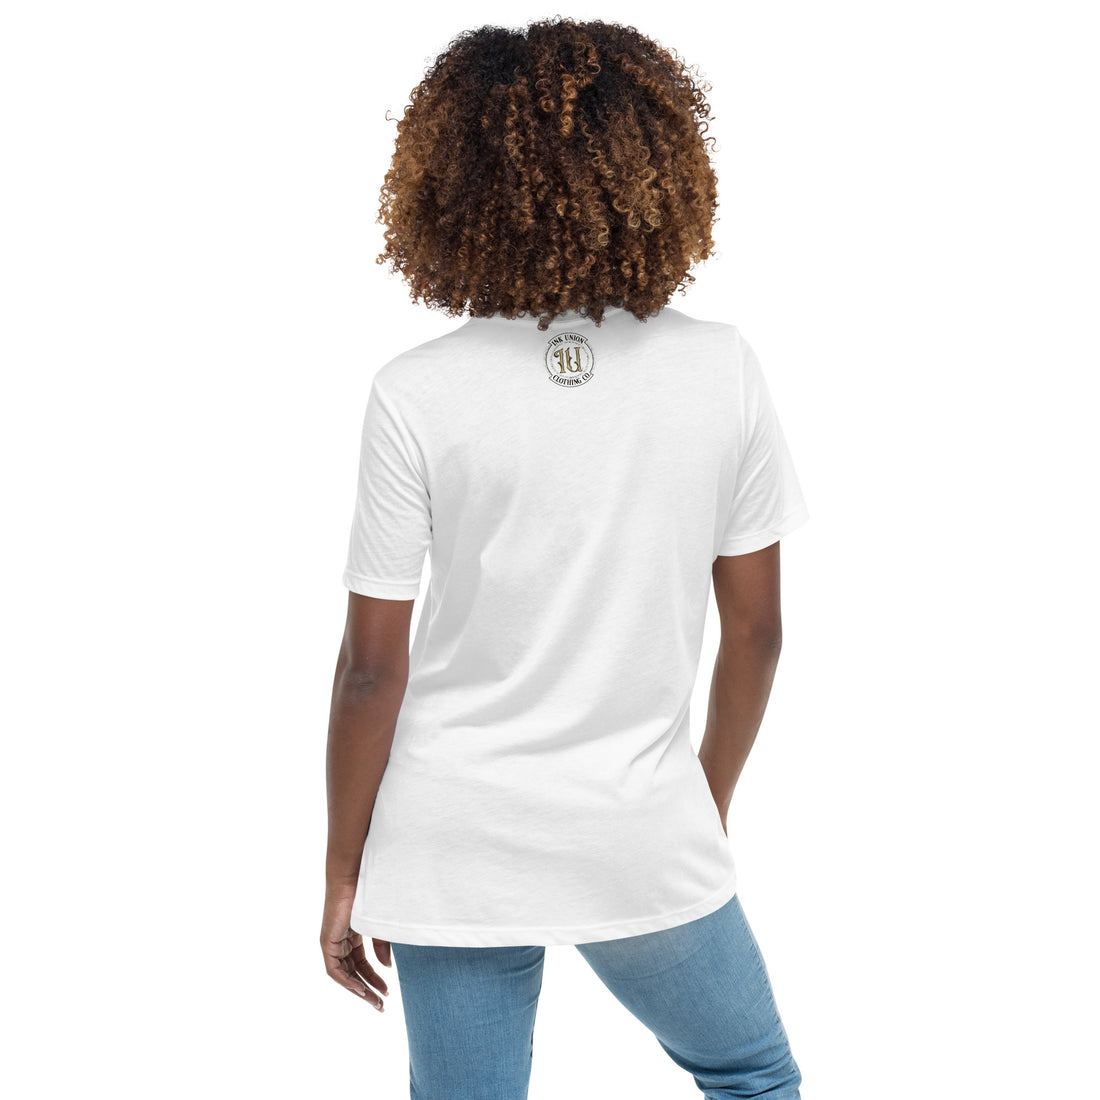 The back view of an attractive woman wearing a white t-shirt with a small gold and black Ink Union badge logo centered just under the neckline.